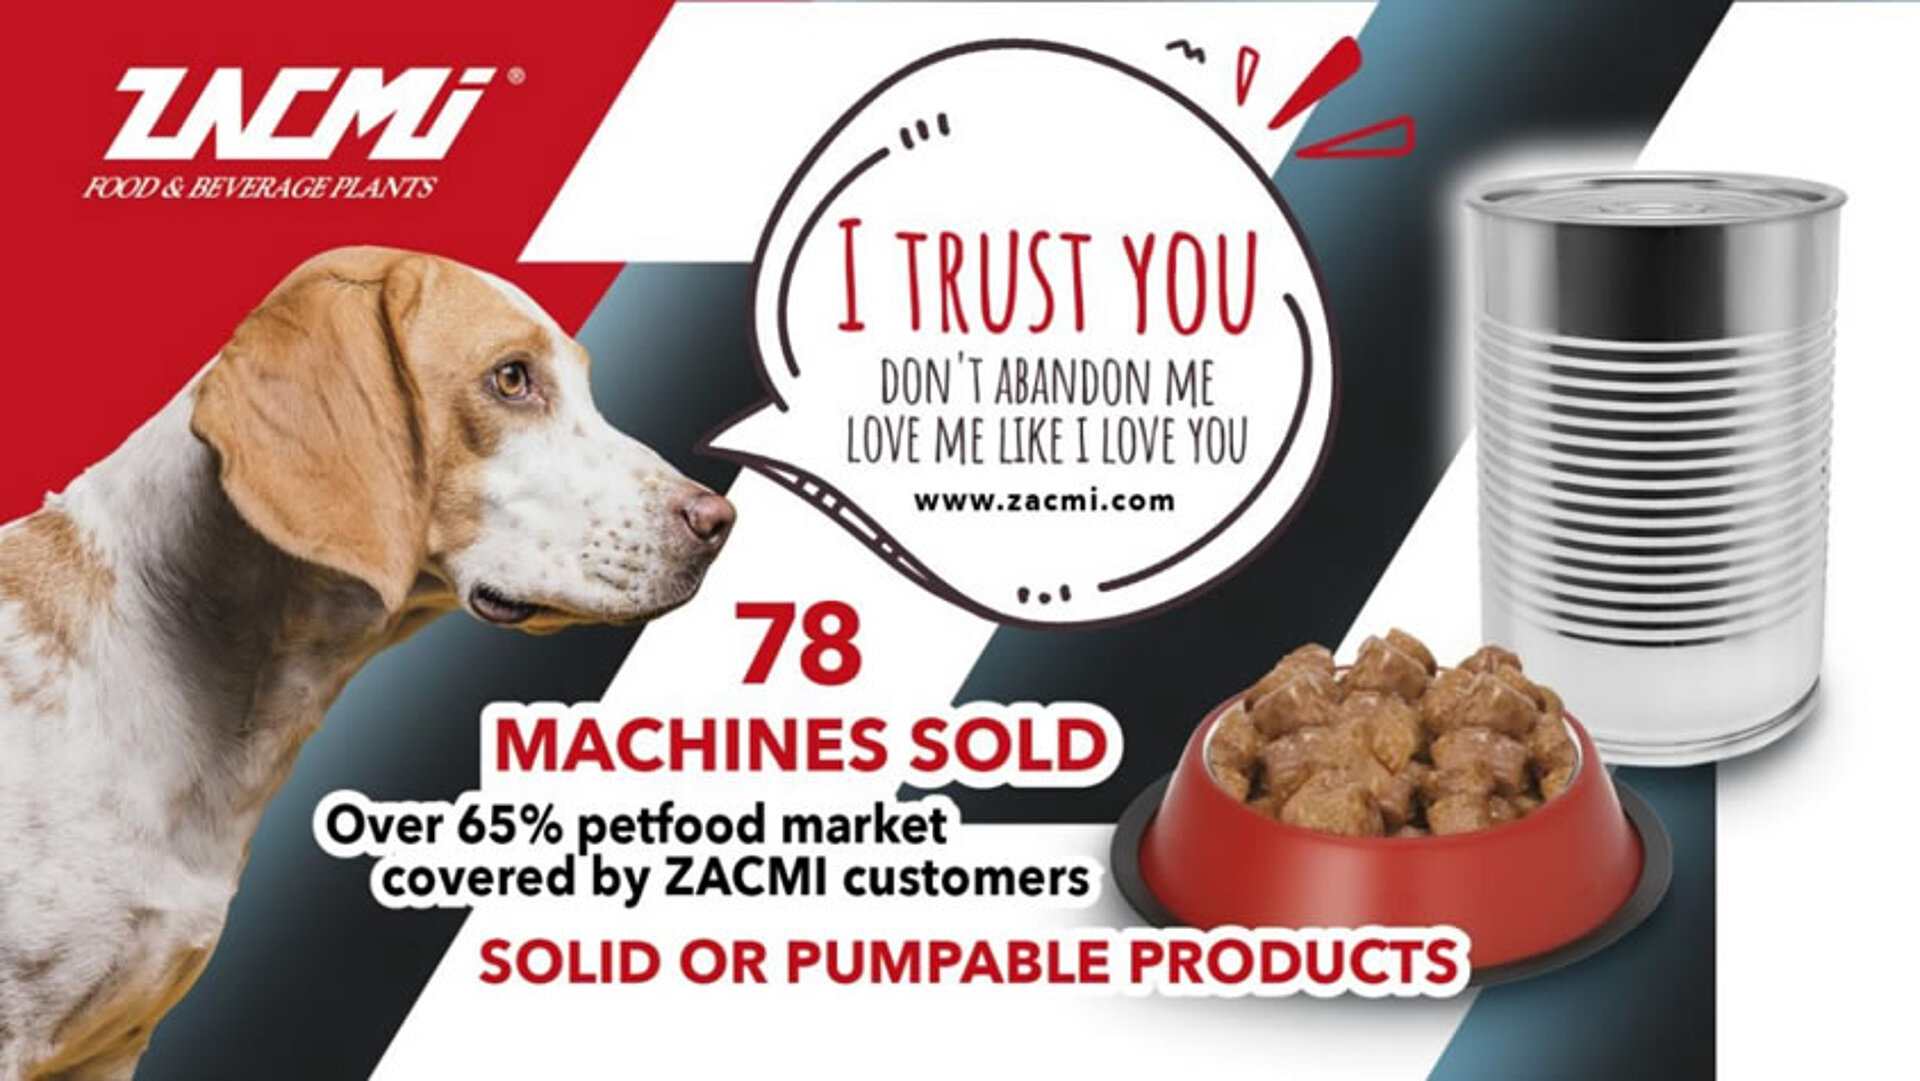 ZACMI advertising with dog and tin can